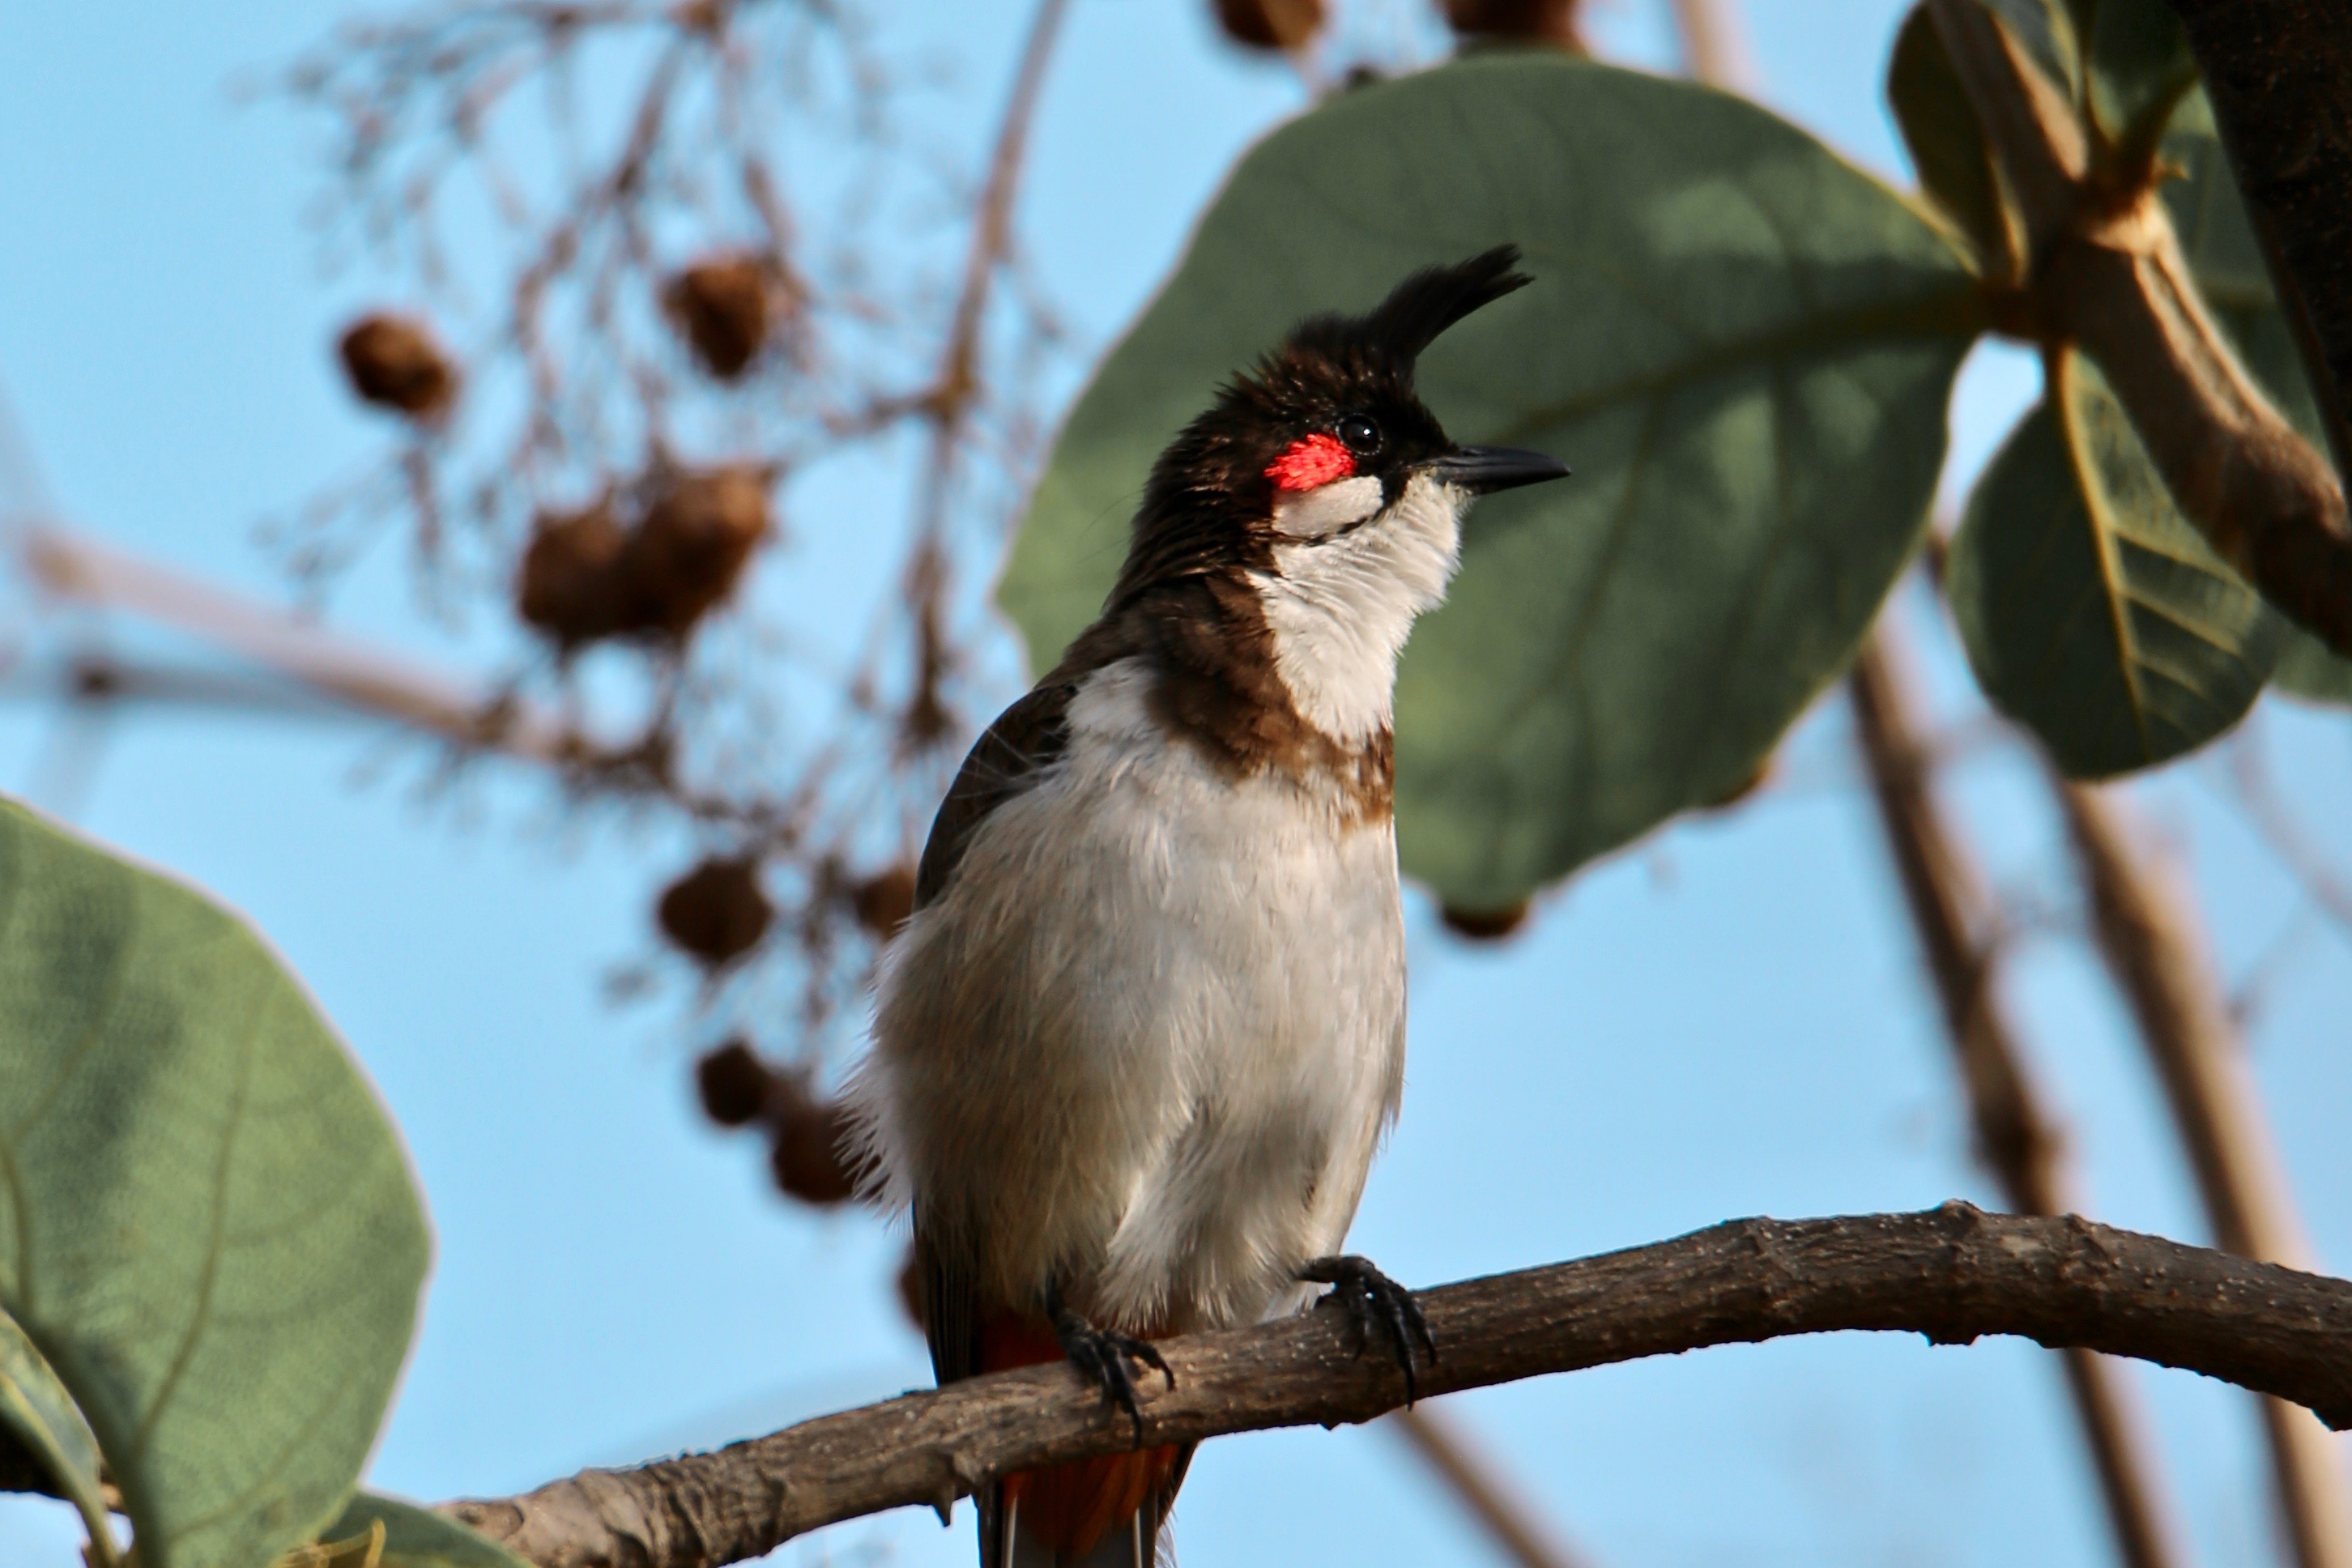 Red Whiskered Bulbul High definition images free